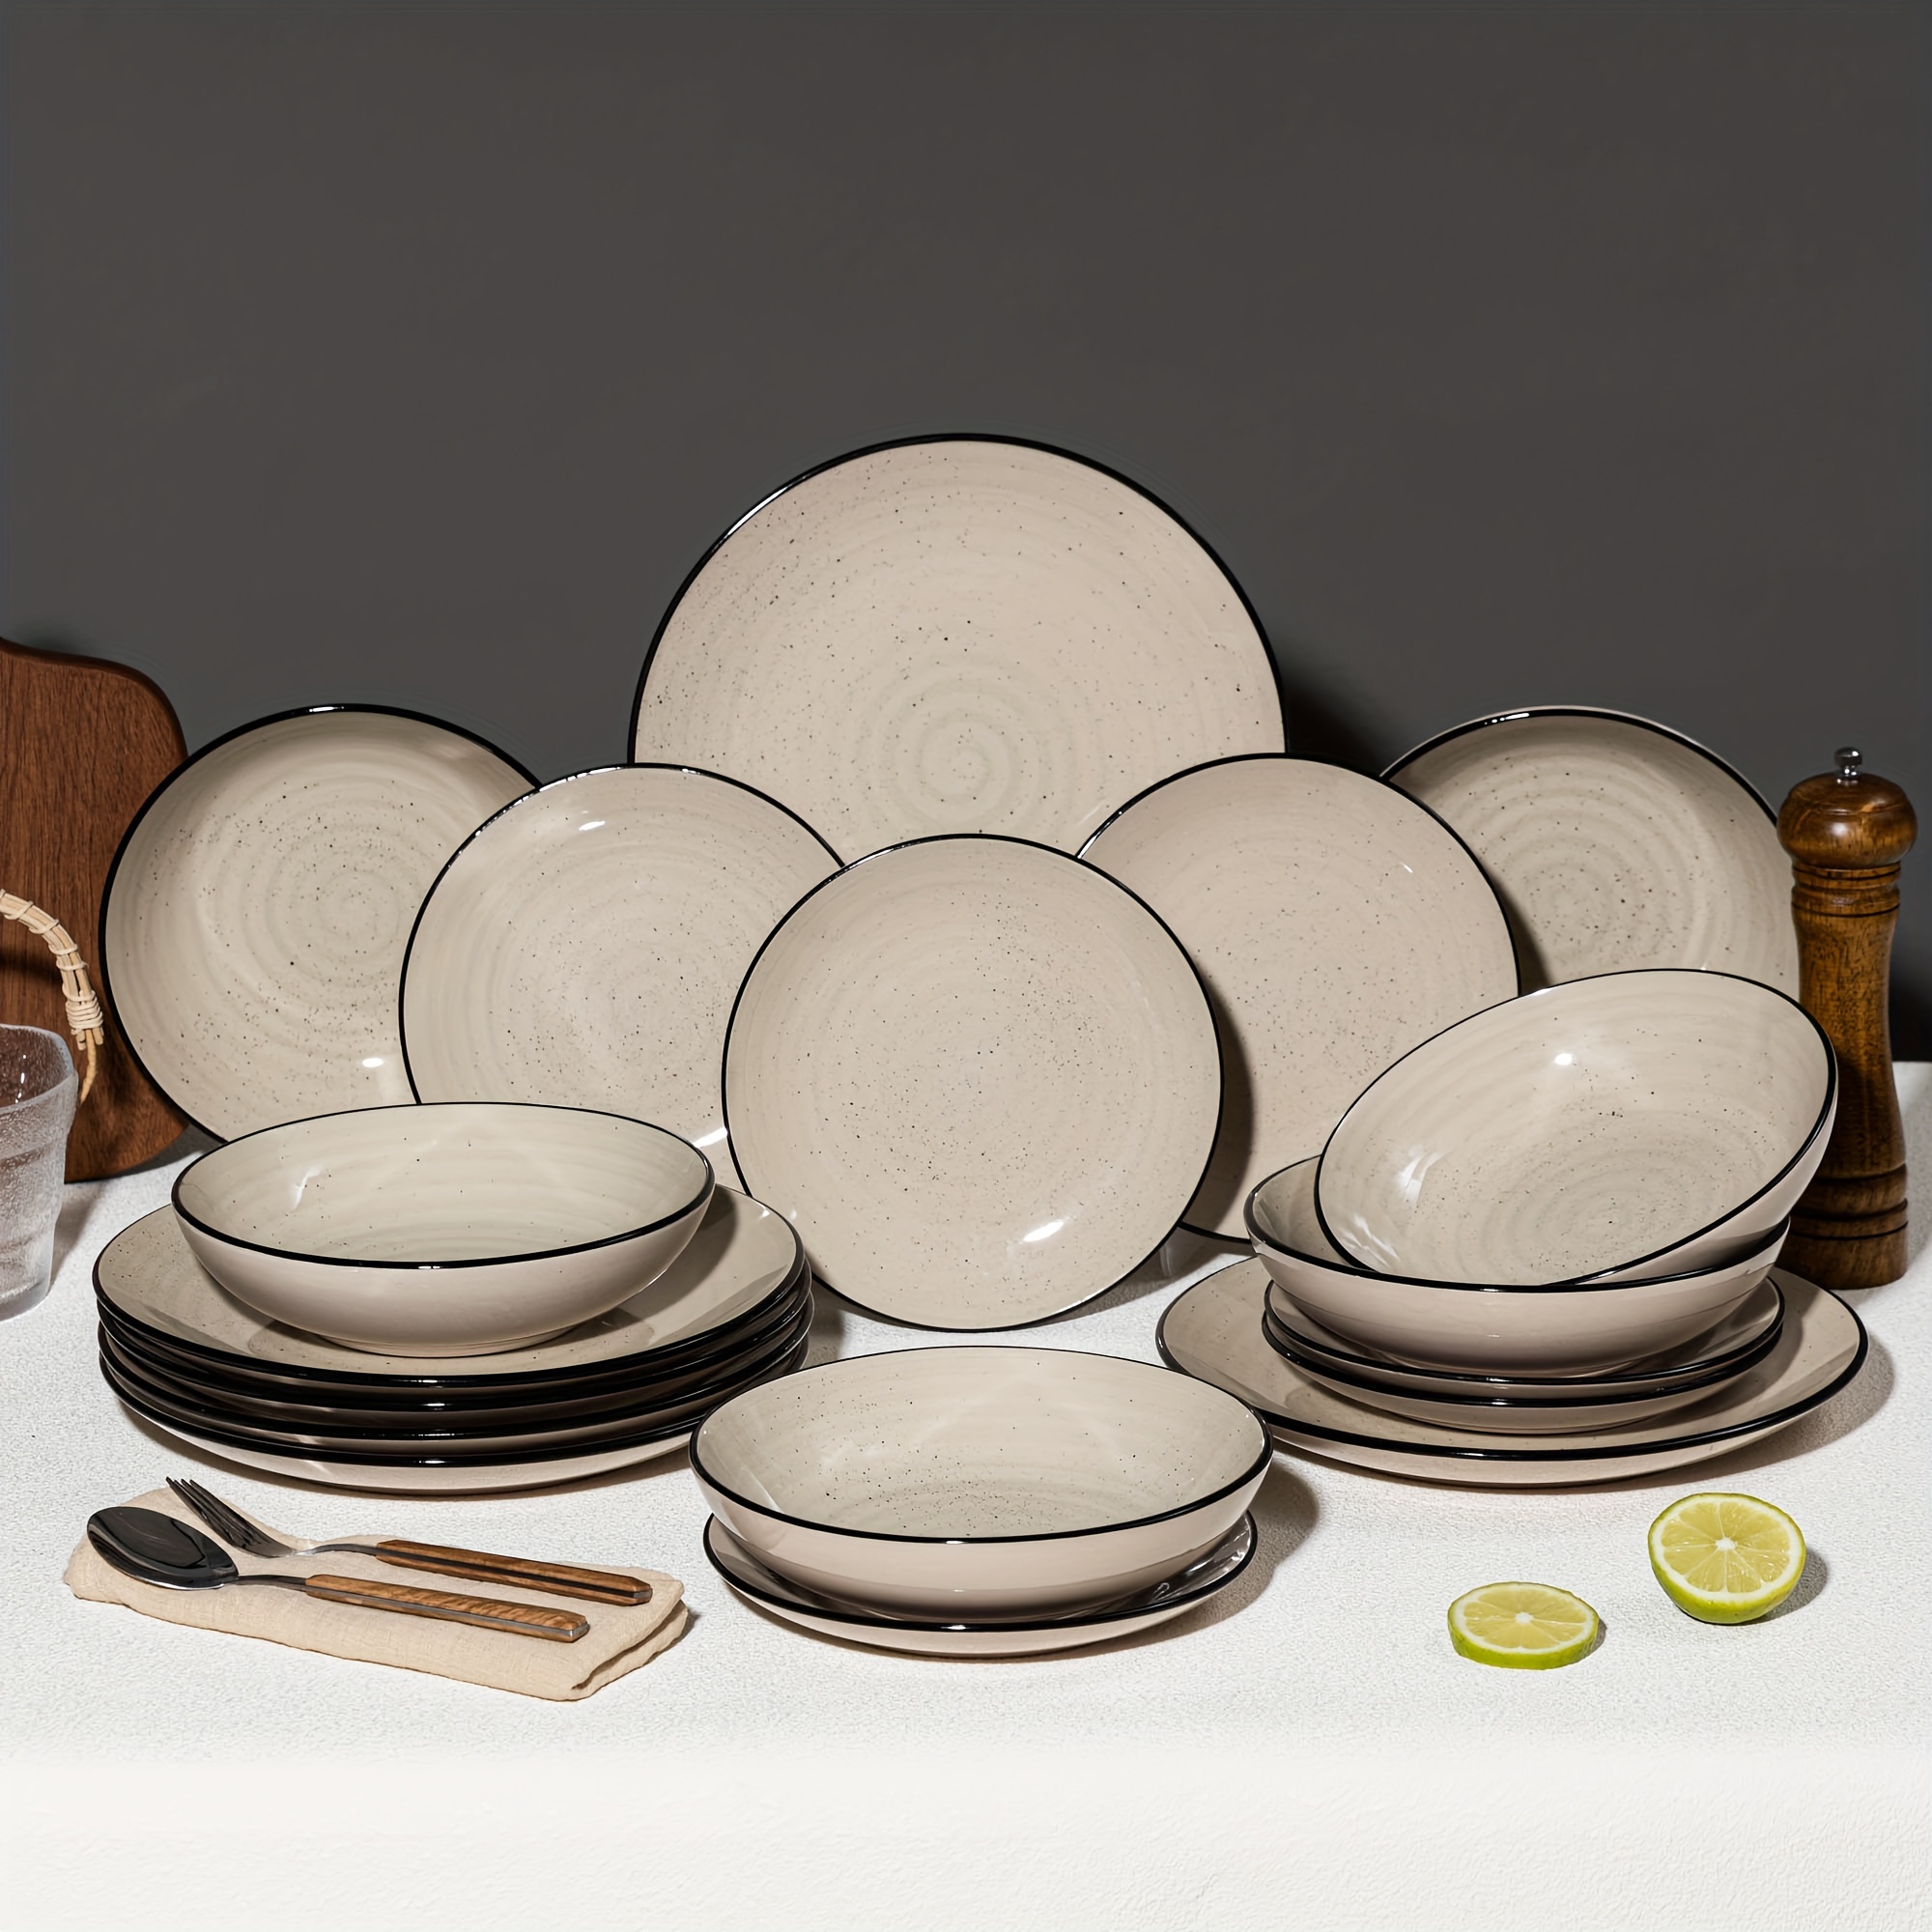 

18-piece Stoneware Dinnerware Set For 6, Handpainted Spirals Pattern Ceramic Combination Set With 10.5in Dinner Plate, 7.5in Dessert Plate And 27oz Soup Bowl